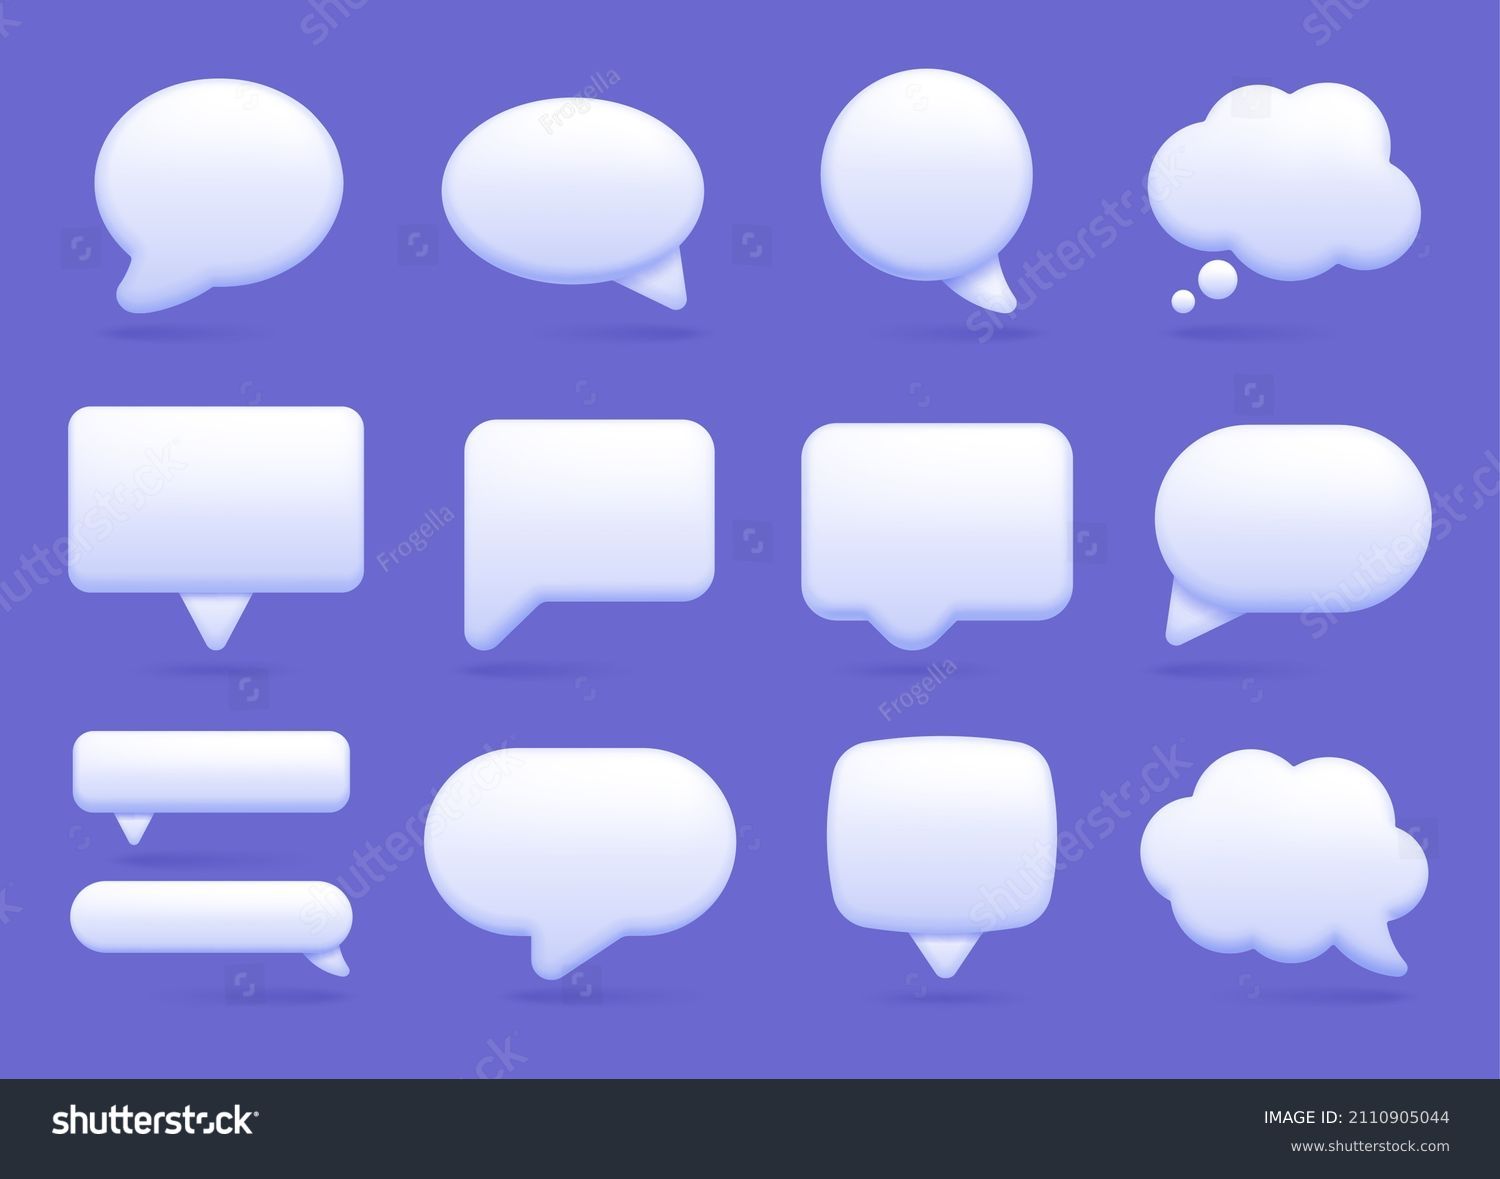 3d white speech bubble, social media chat message icon. Empty text bubbles in various shapes, comment, dialogue balloon vector set. Thought clouds of different shape as rectangle, ellipse #2110905044